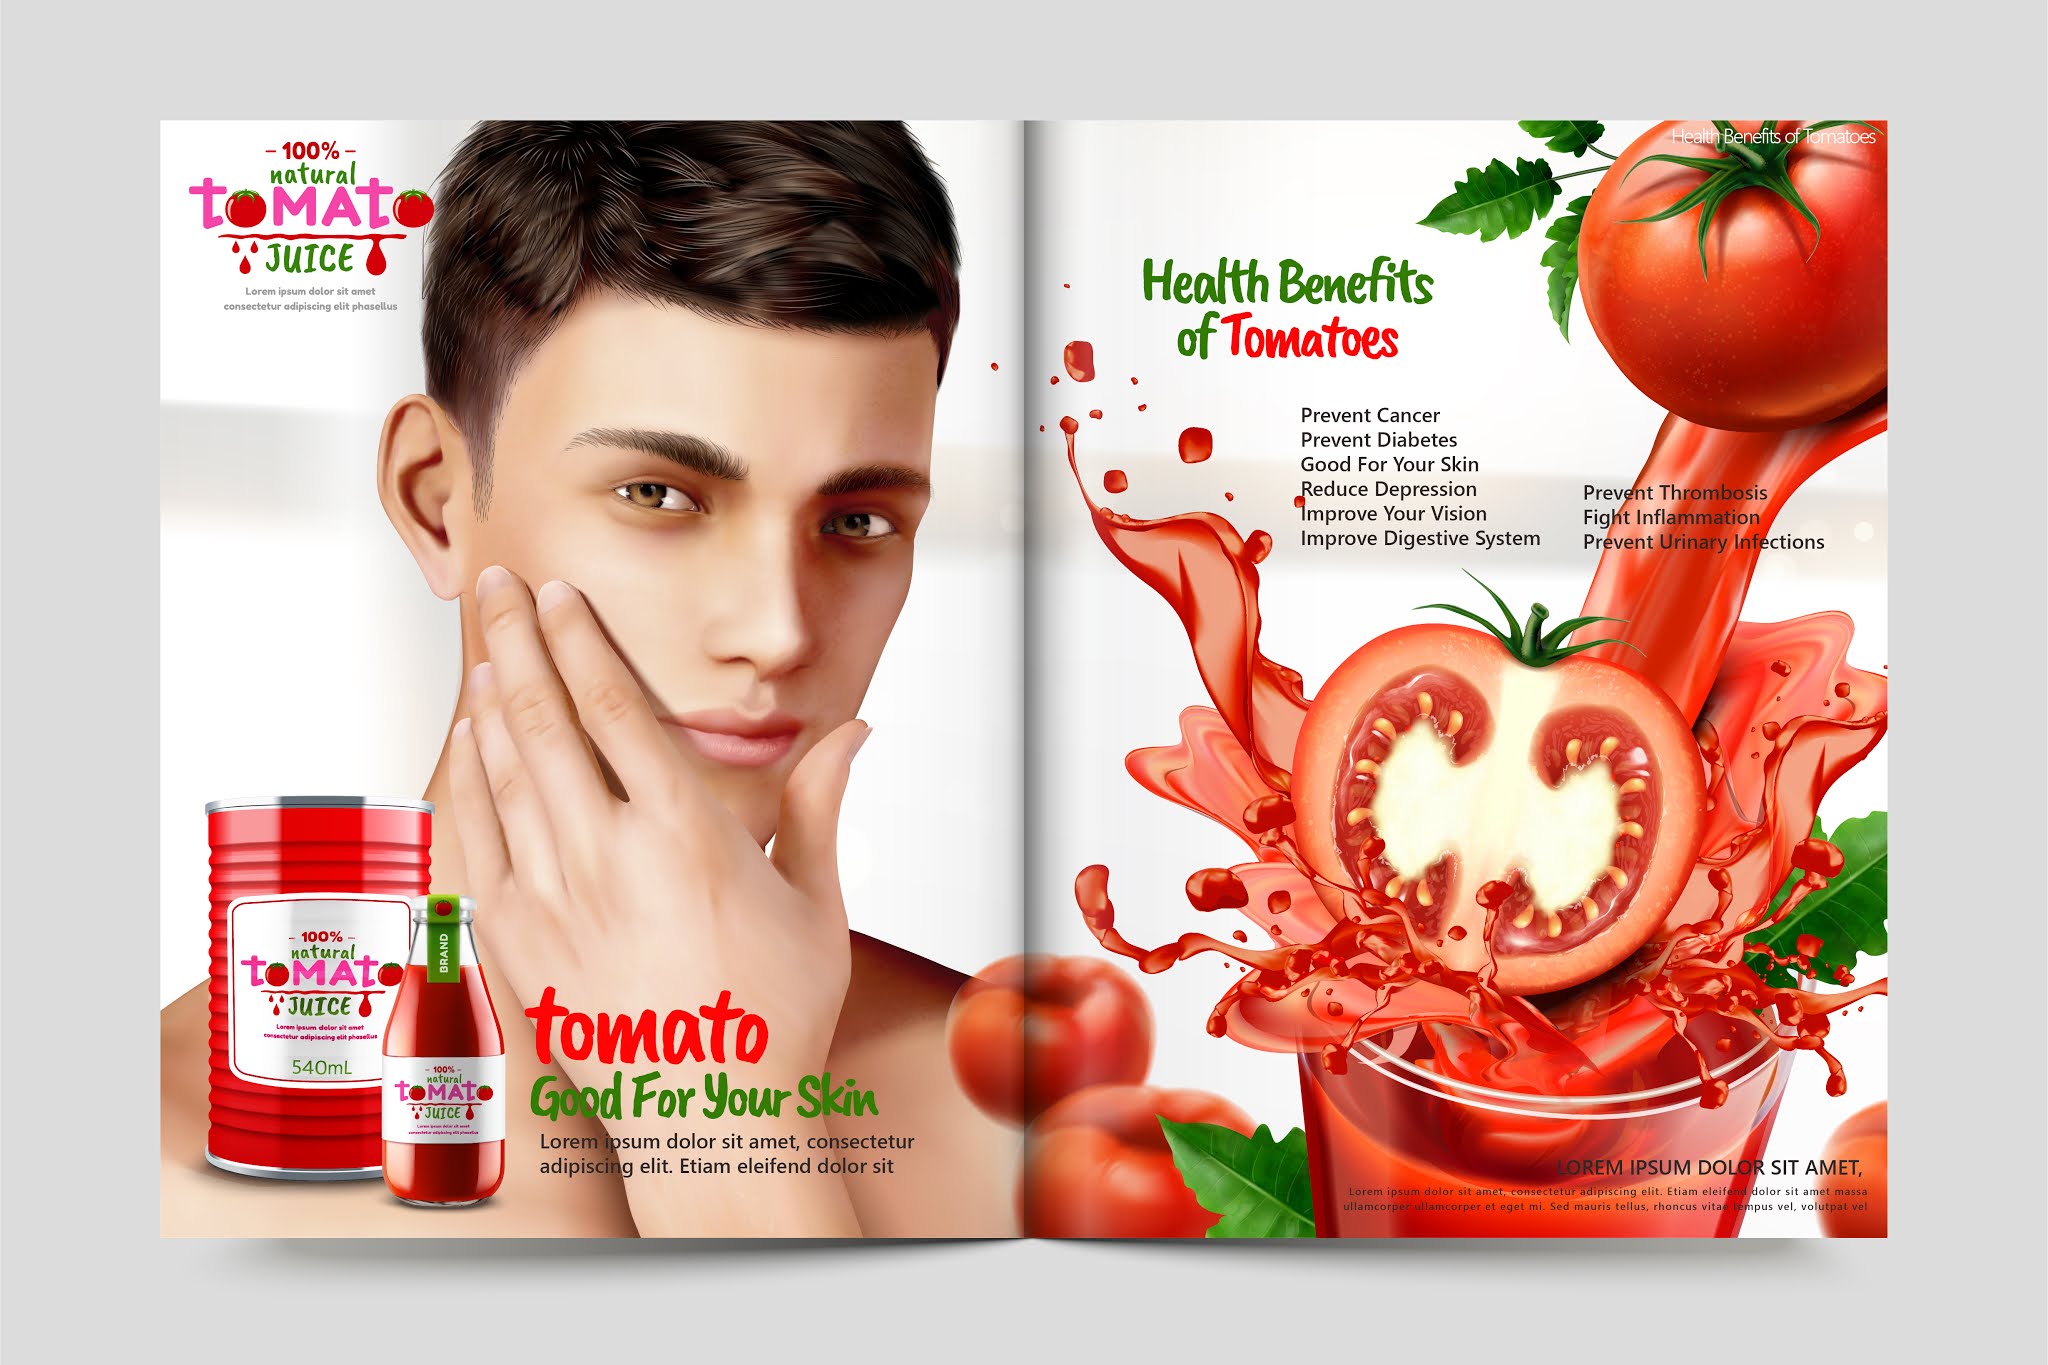 Download the design of a magazine for beauty products in vector format, and you can also convert it into a Photoshop file